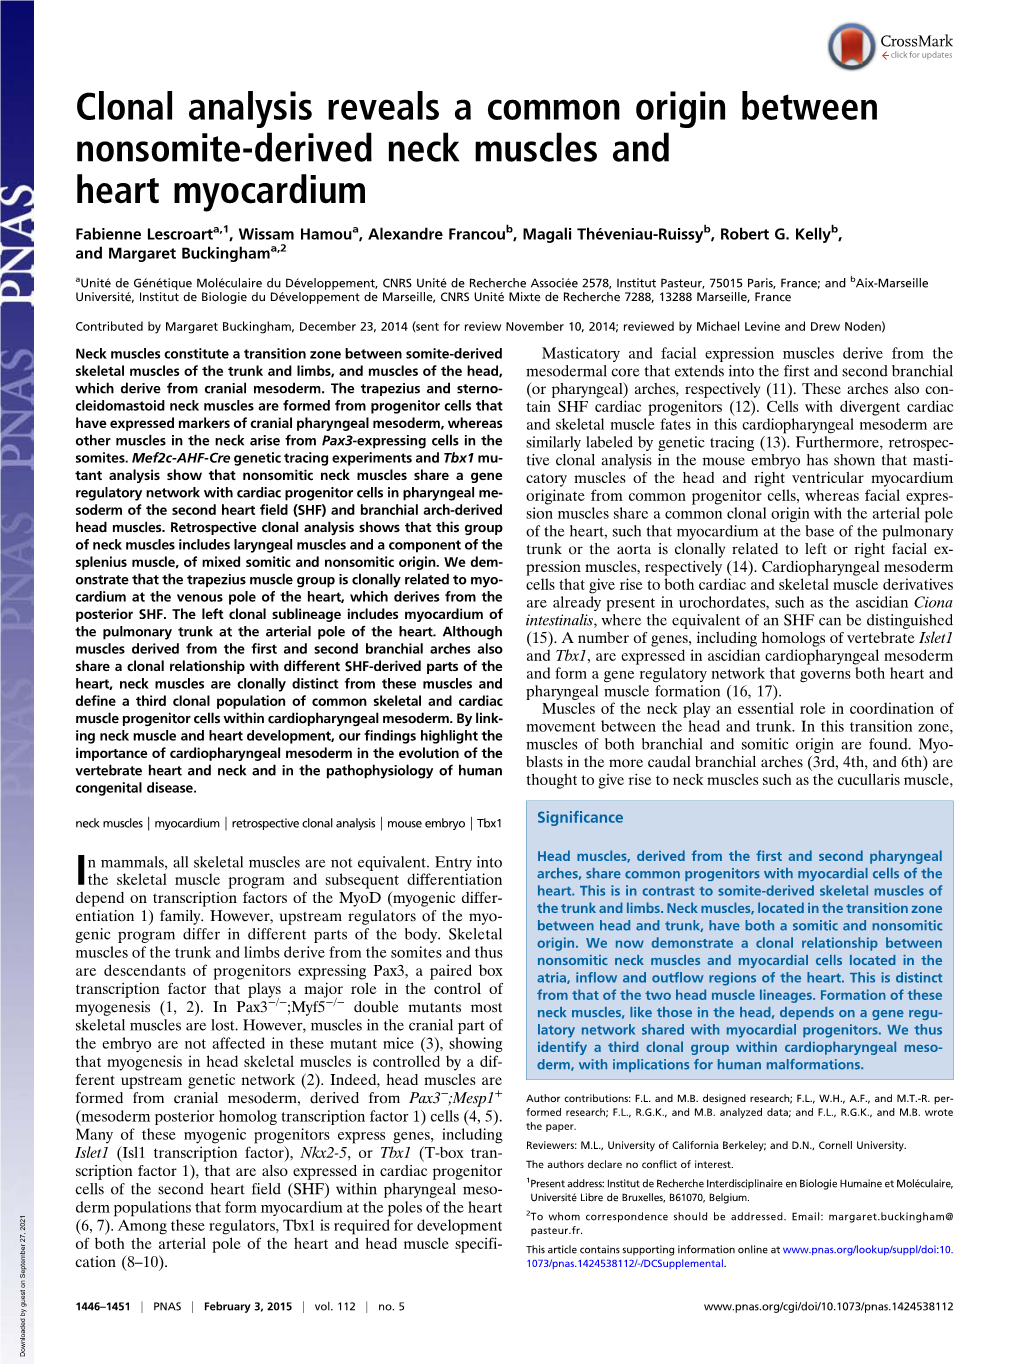 Clonal Analysis Reveals a Common Origin Between Nonsomite-Derived Neck Muscles and Heart Myocardium